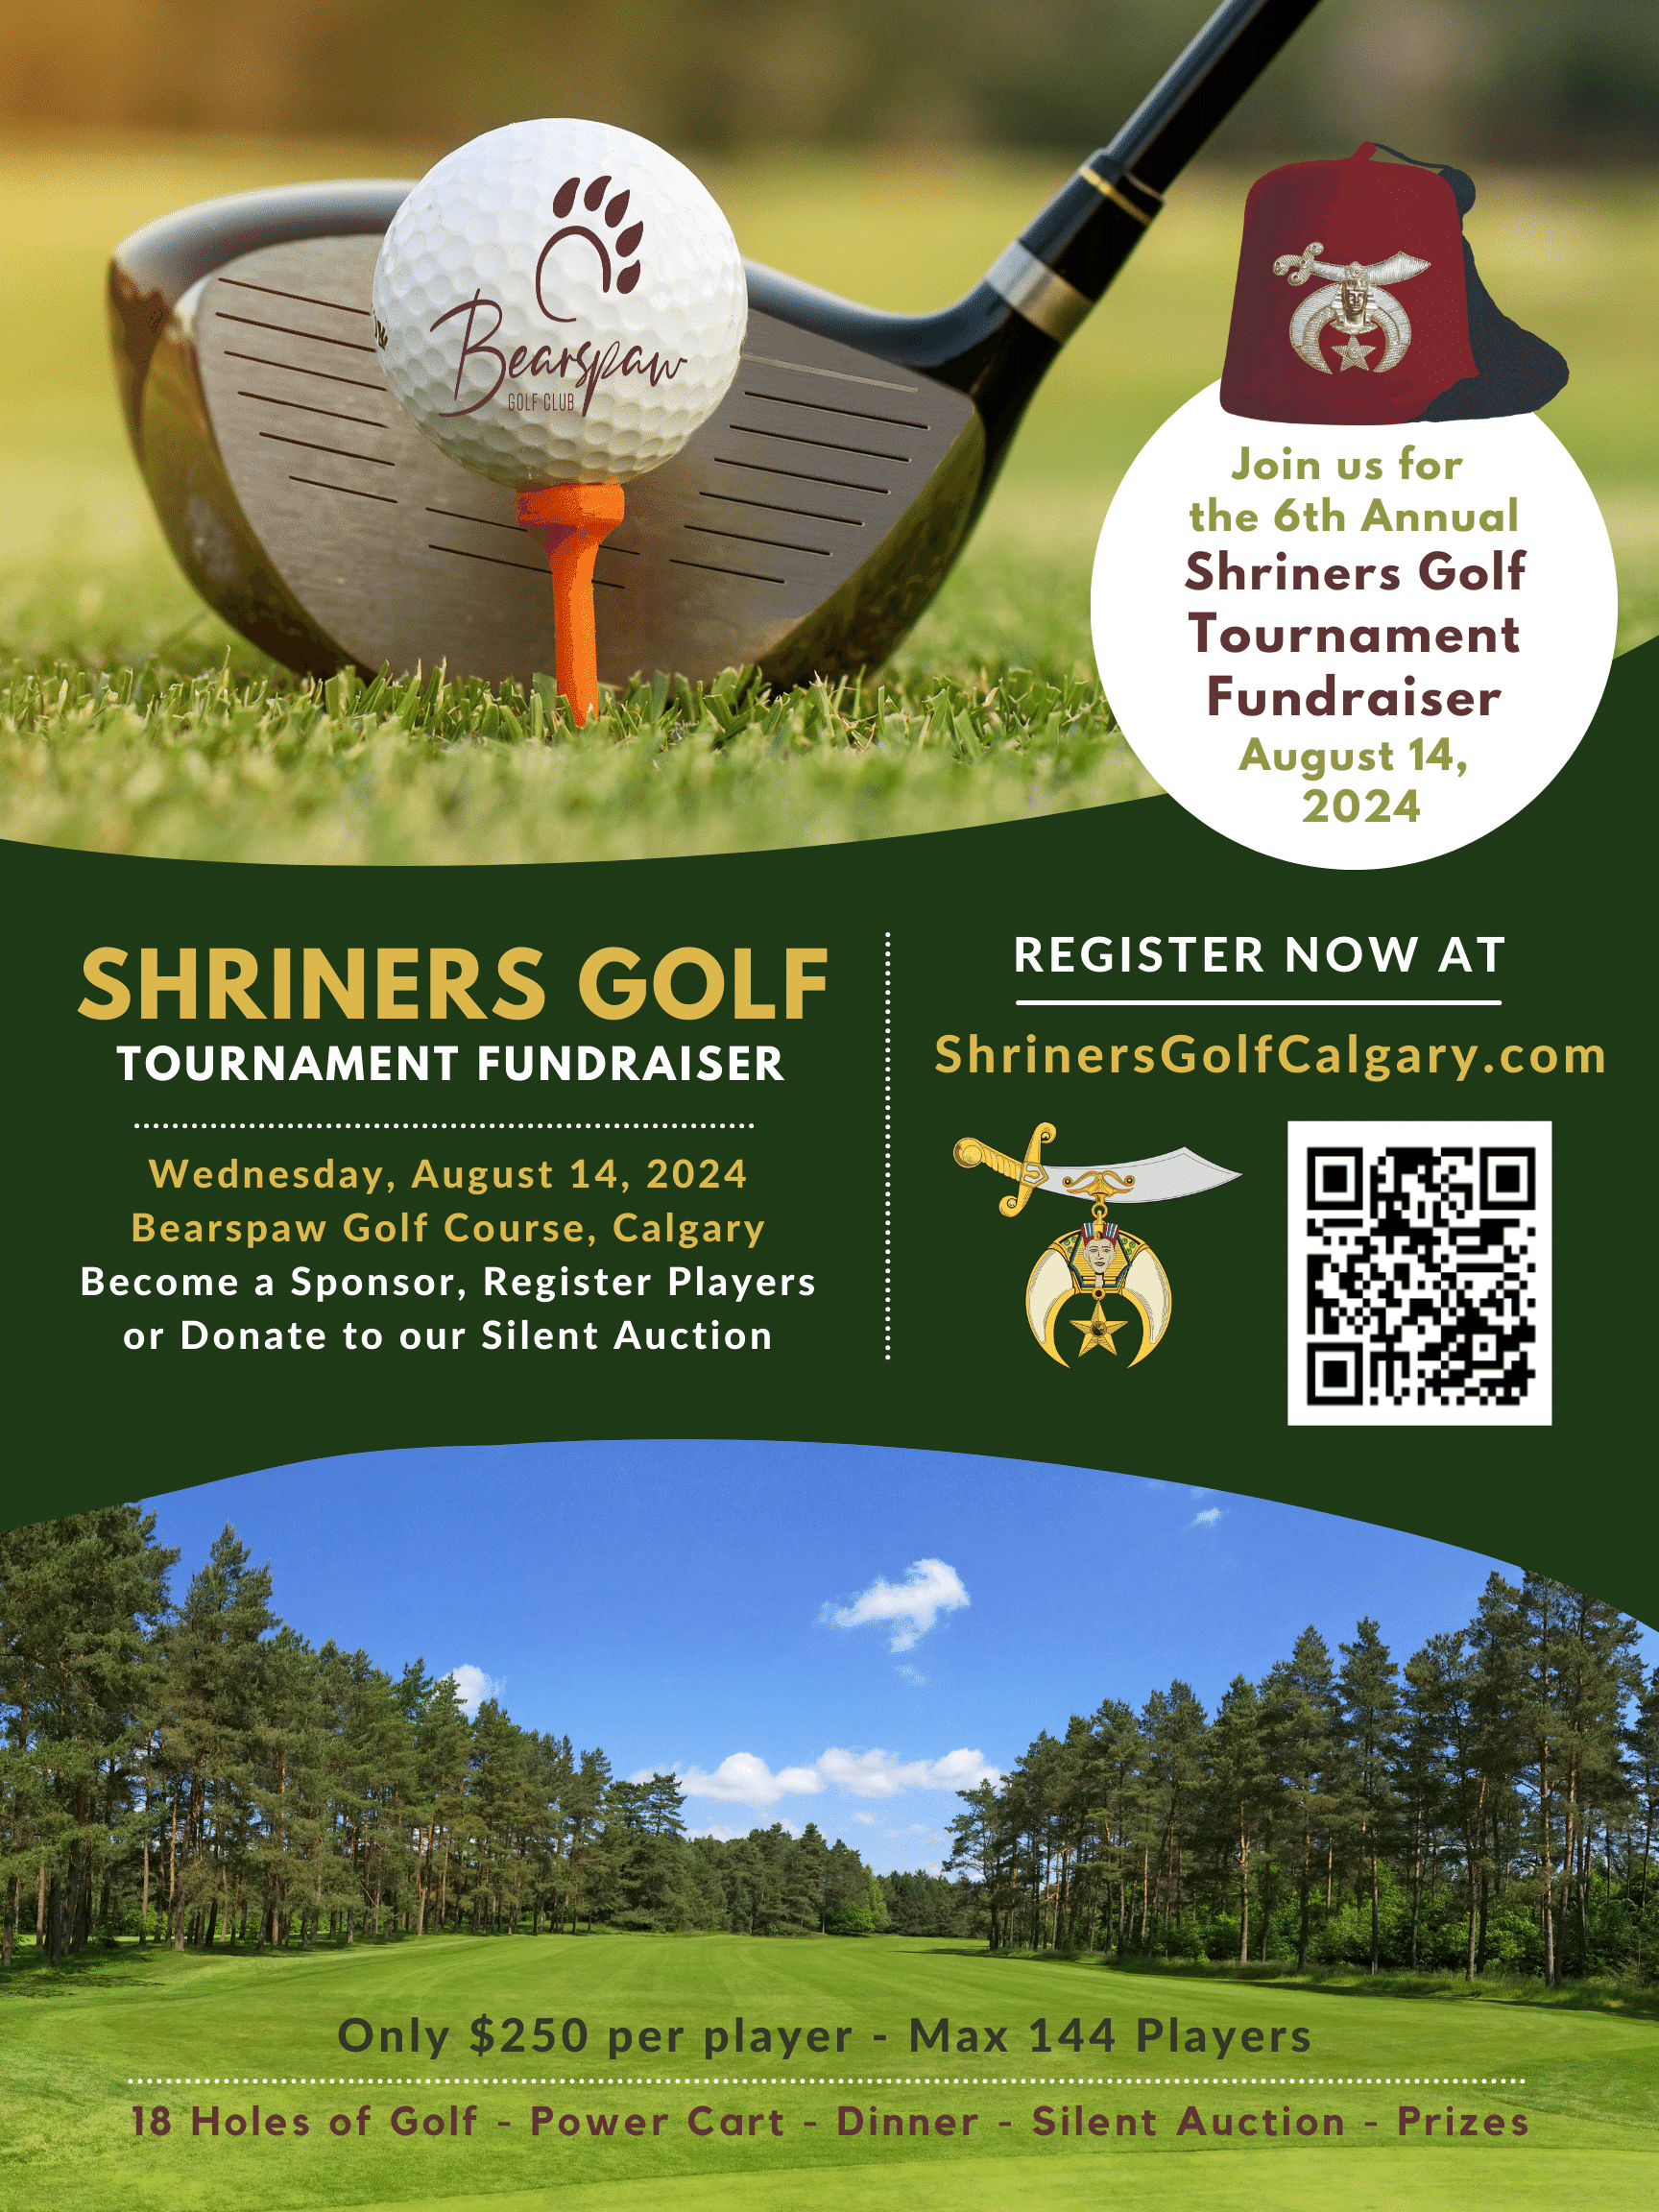 Poster for the Shriners Golf Tournament